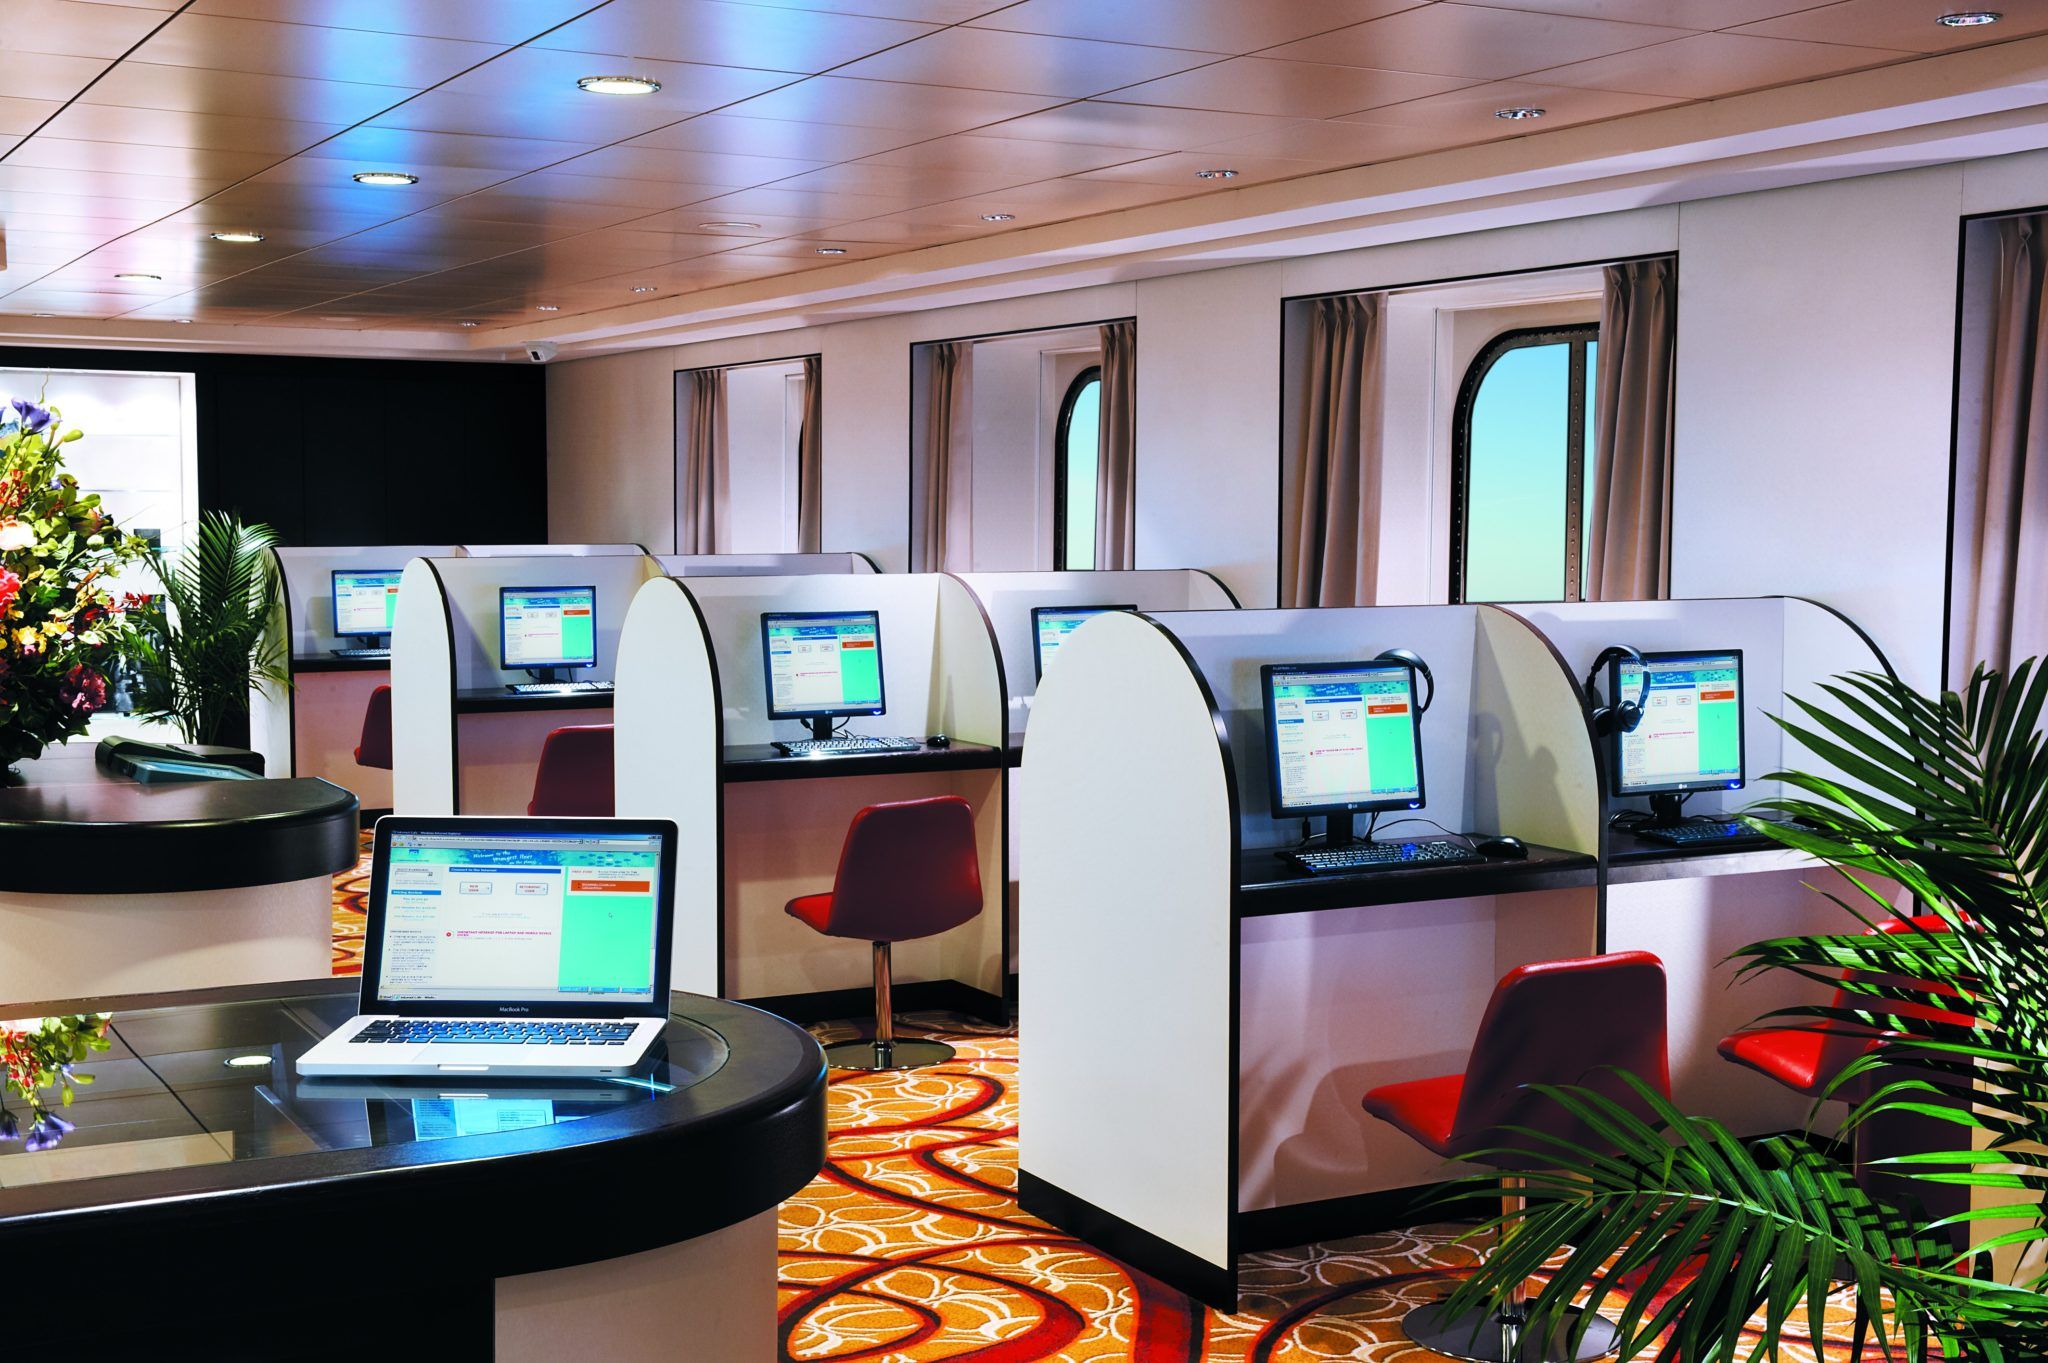 do all cruise ships have wifi